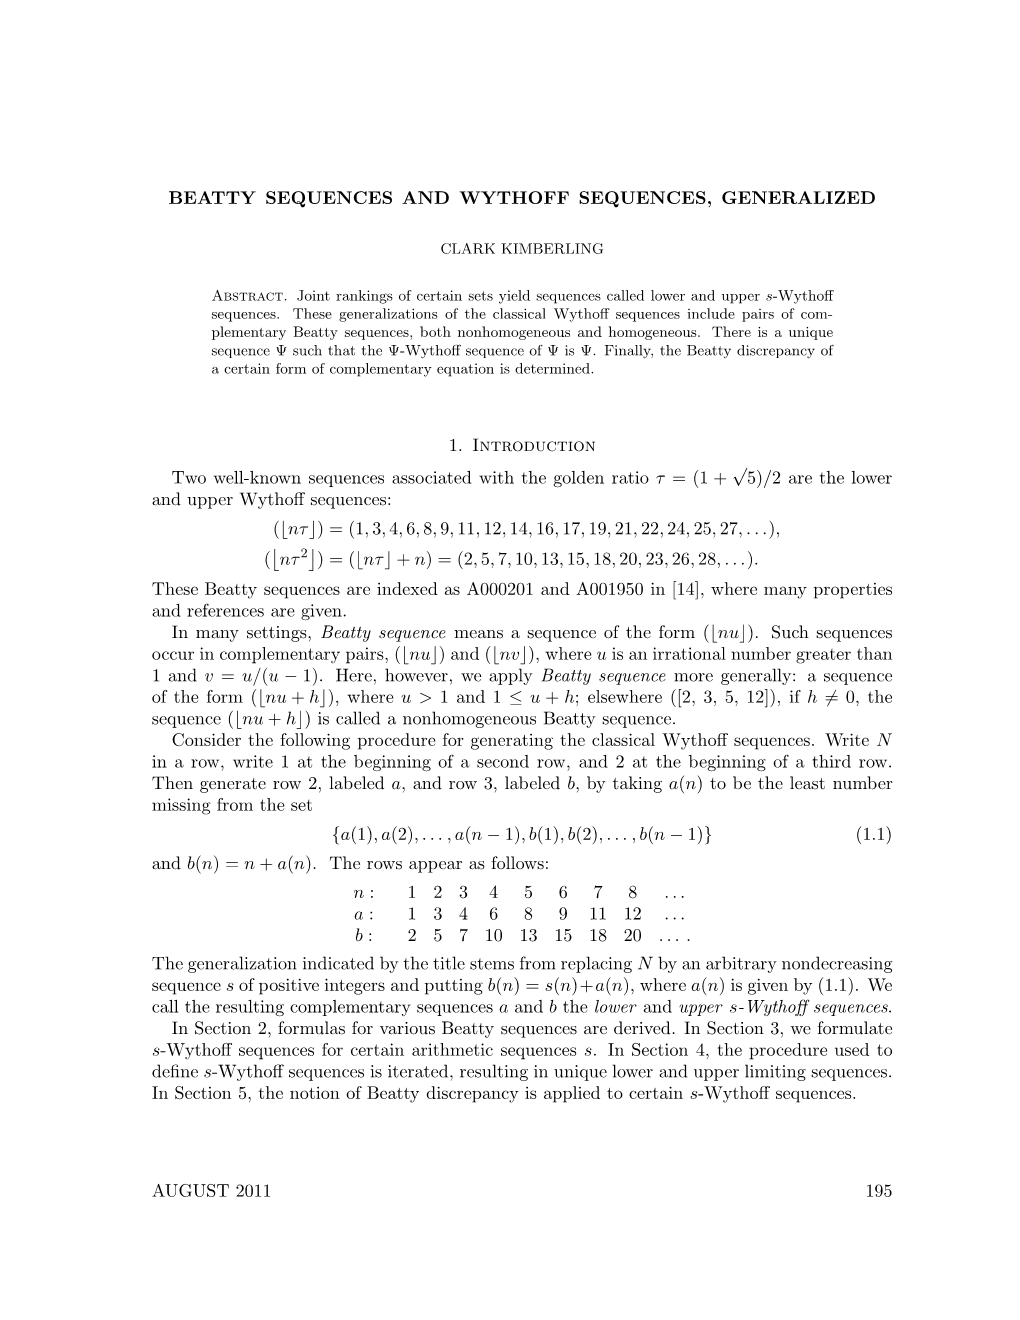 Beatty Sequences and Wythoff Sequences, Generalized